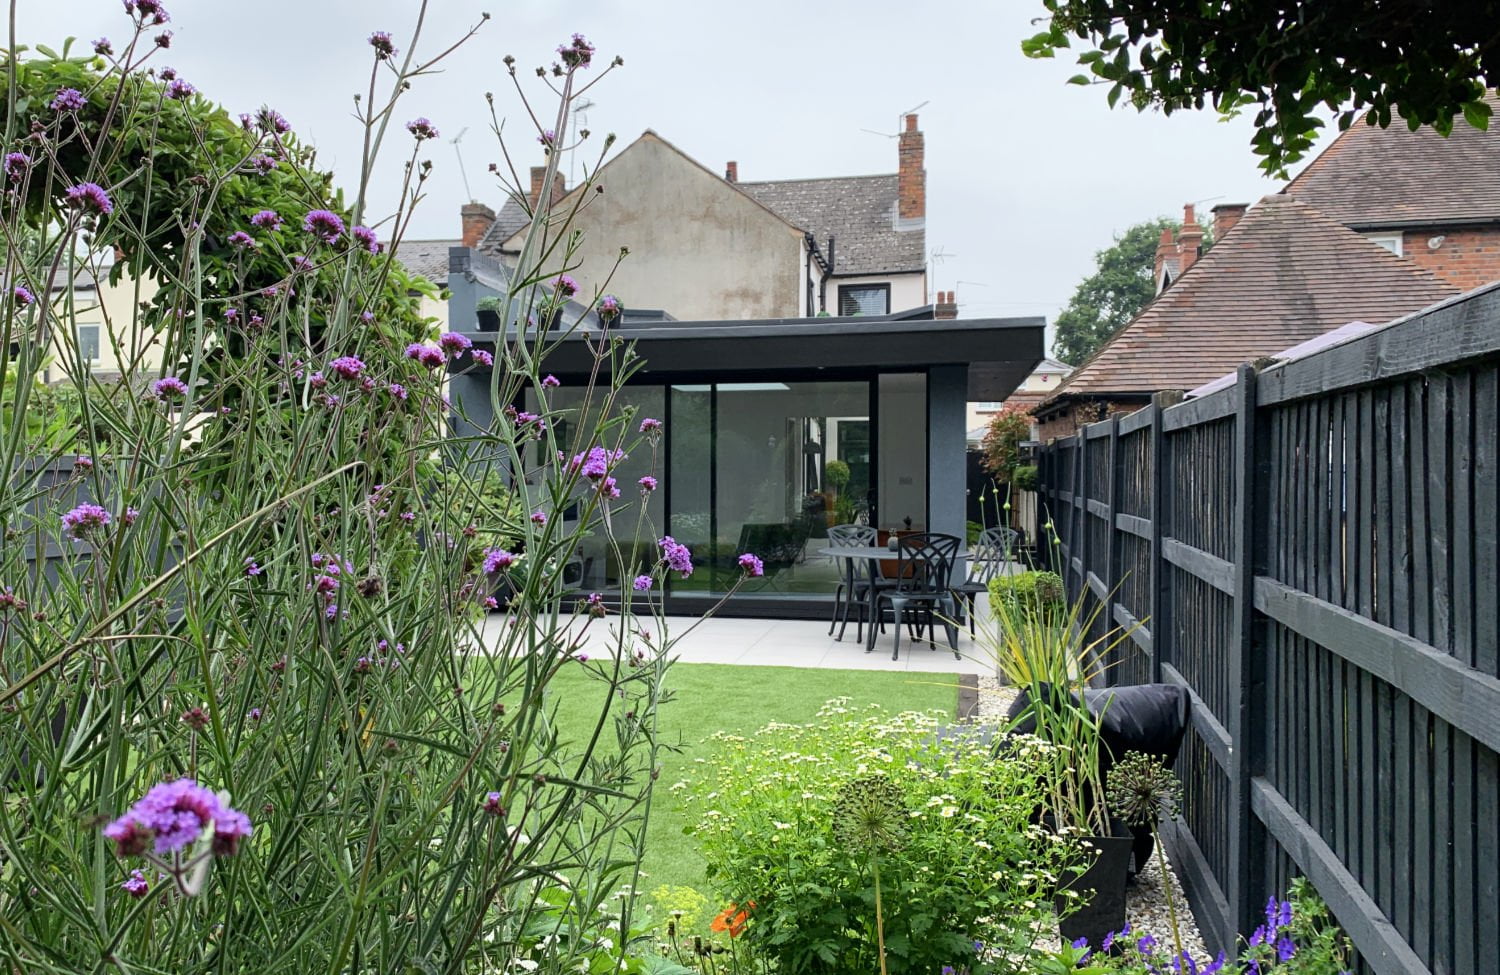 Modernist Rear Extension to Victorian Terrace in Stourbridge, West Midlands